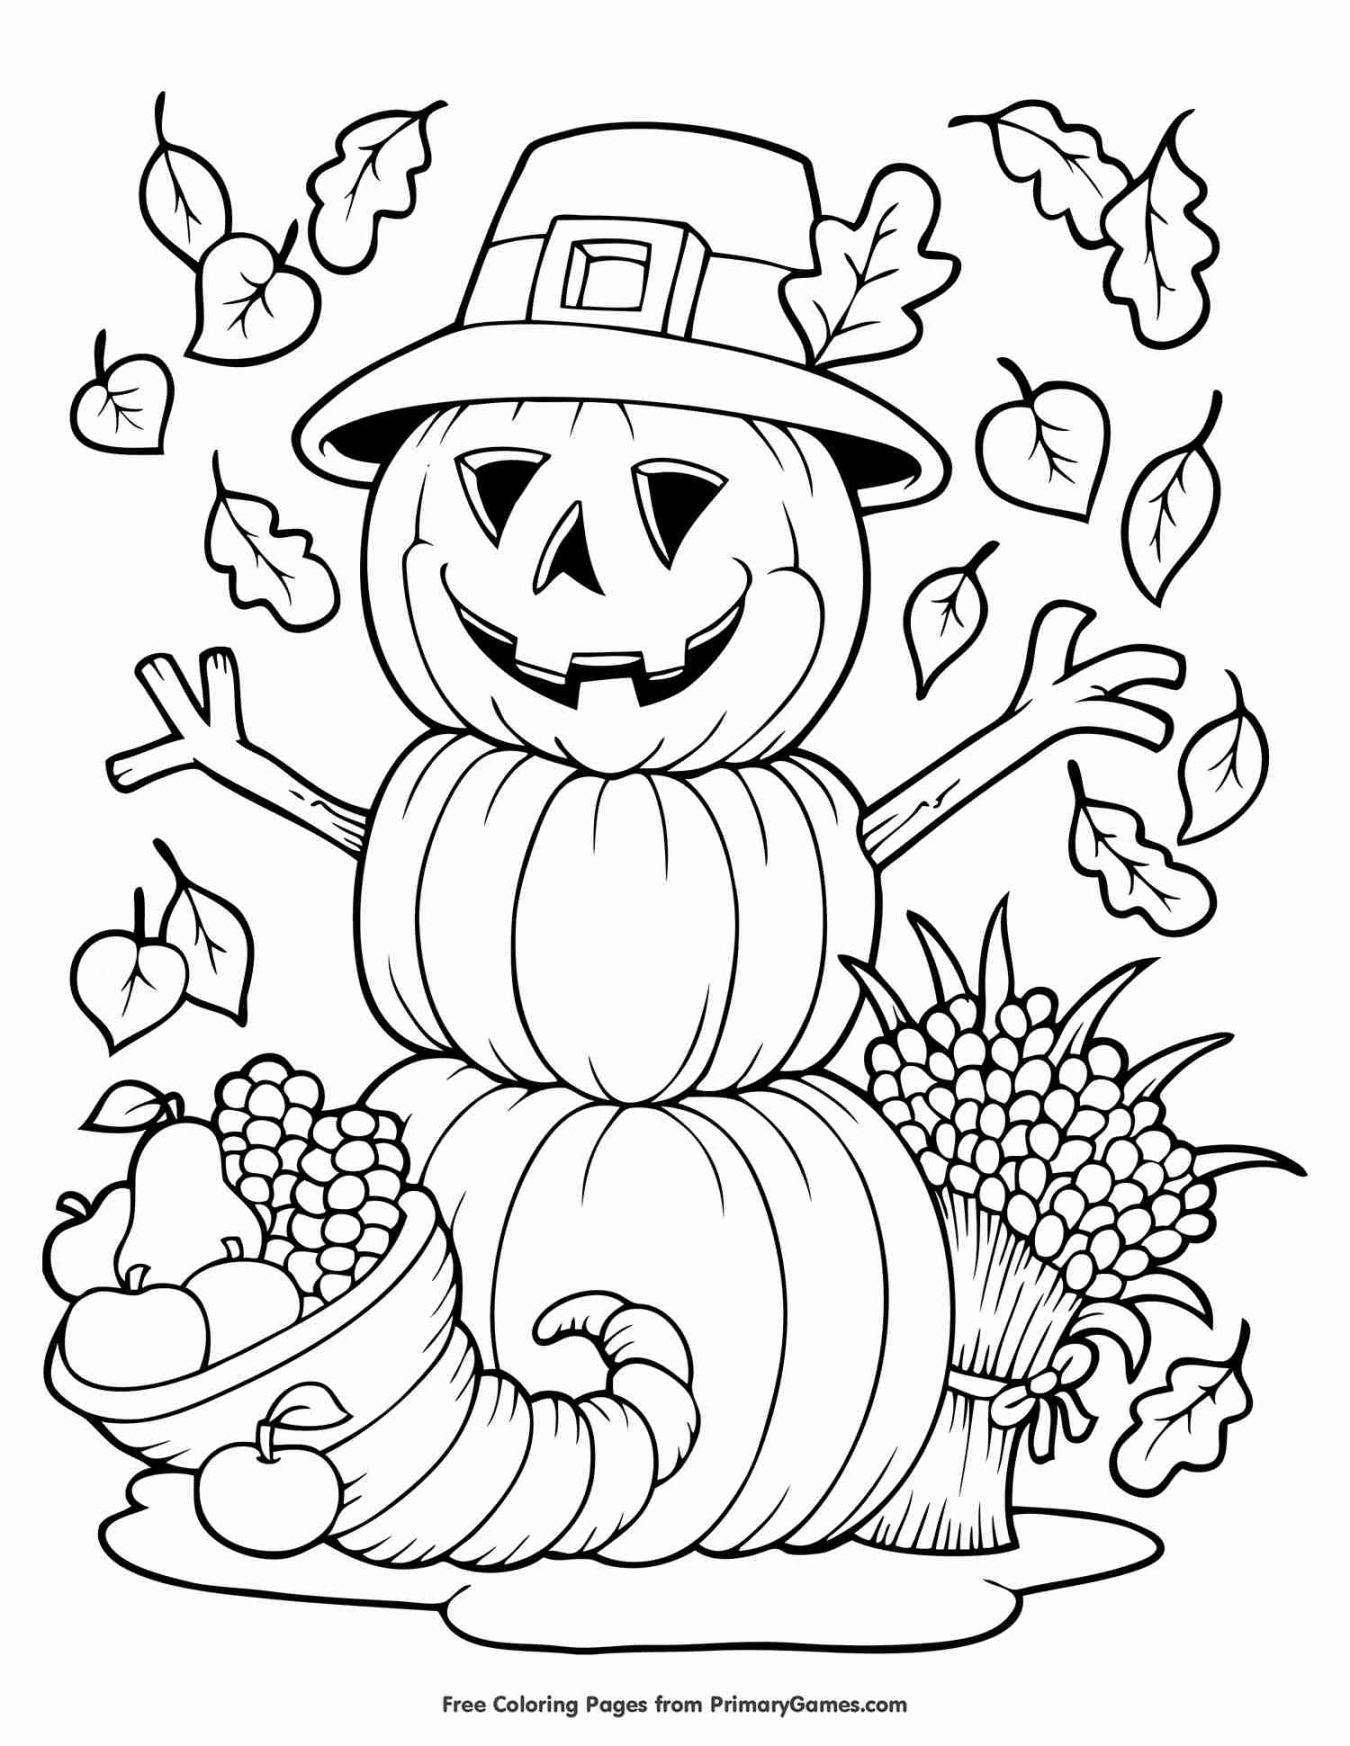 Free Fall Coloring Pages Printable - Printable -  Places to Find Free Autumn and Fall Coloring Pages